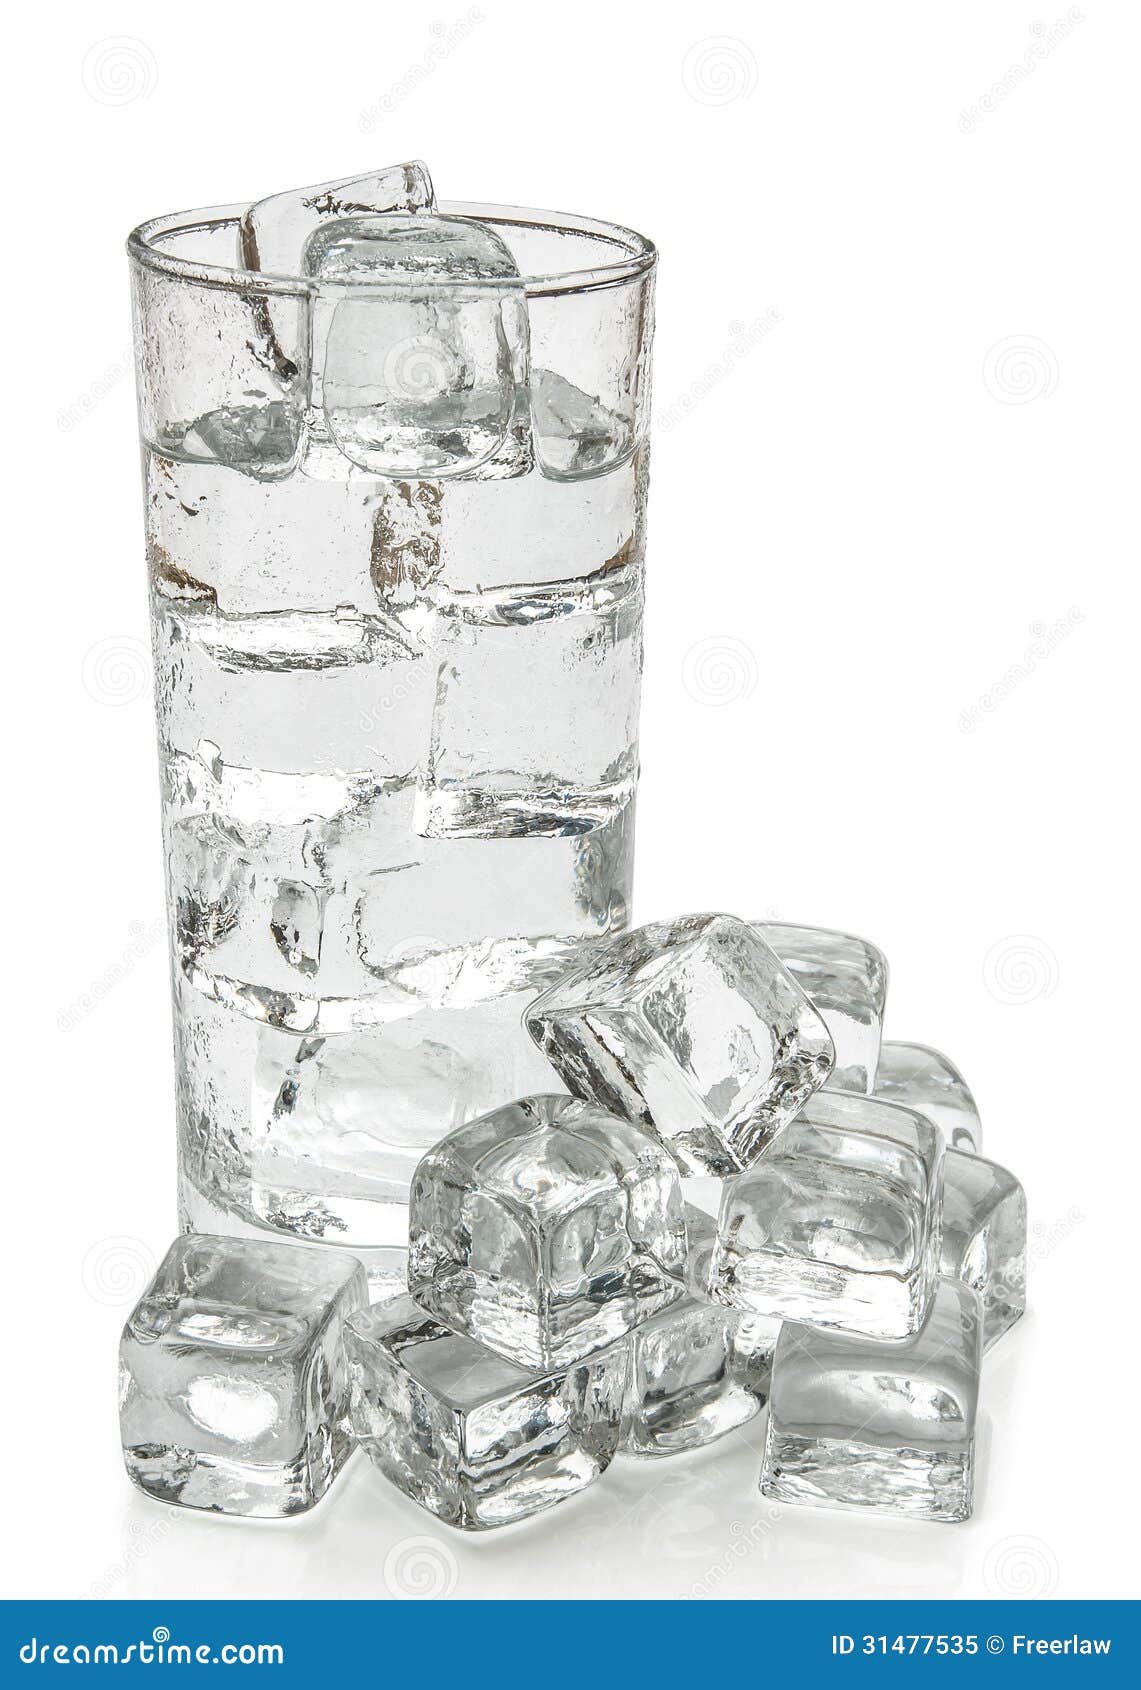 Cup Of Water And Ice Cubes Stock Image Image Of Beverage